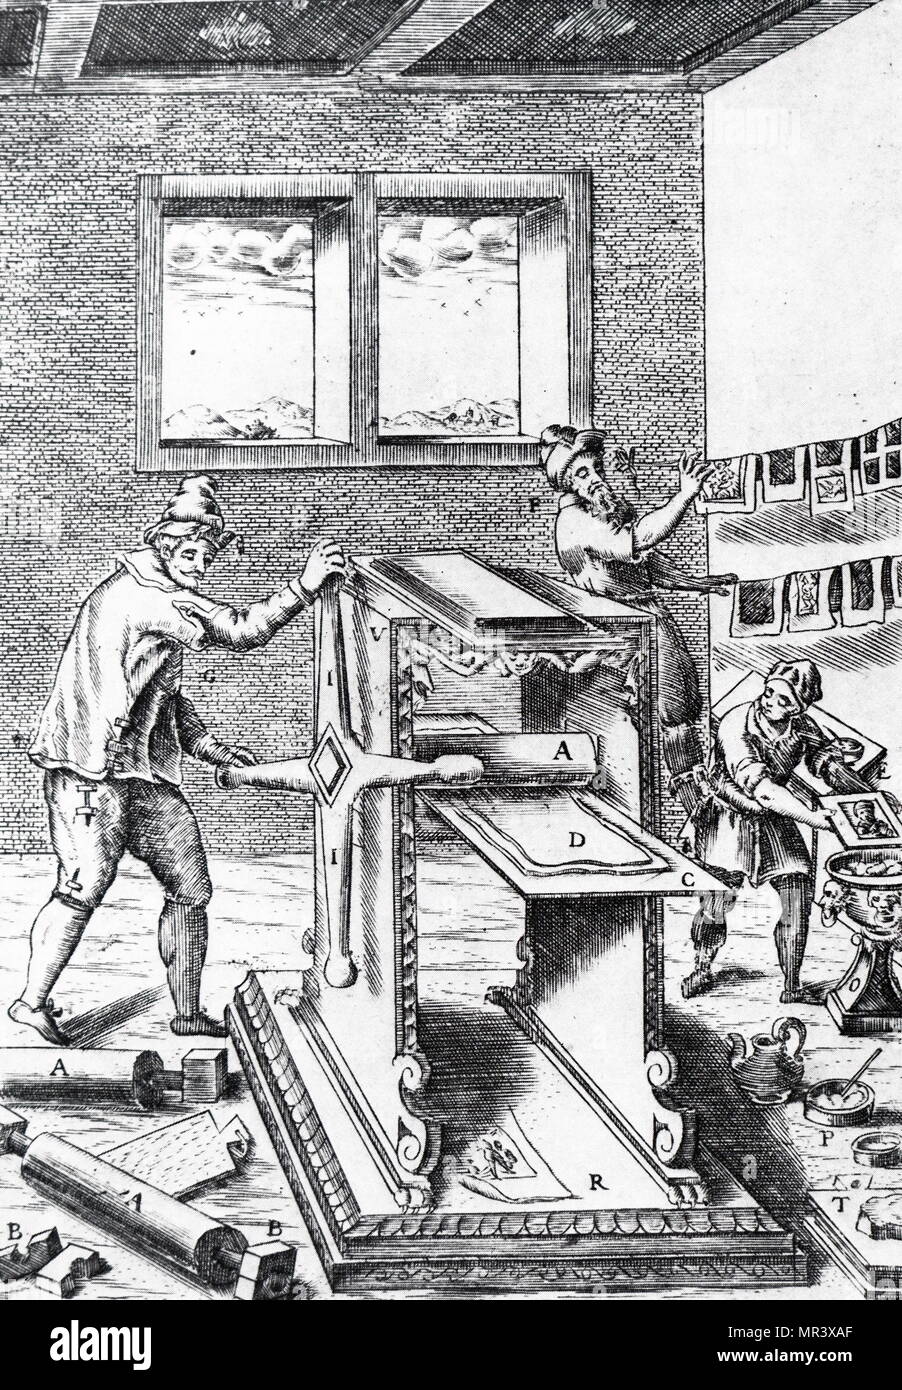 Engraving depicting a copperplate printer. Dated 19th century Stock Photo